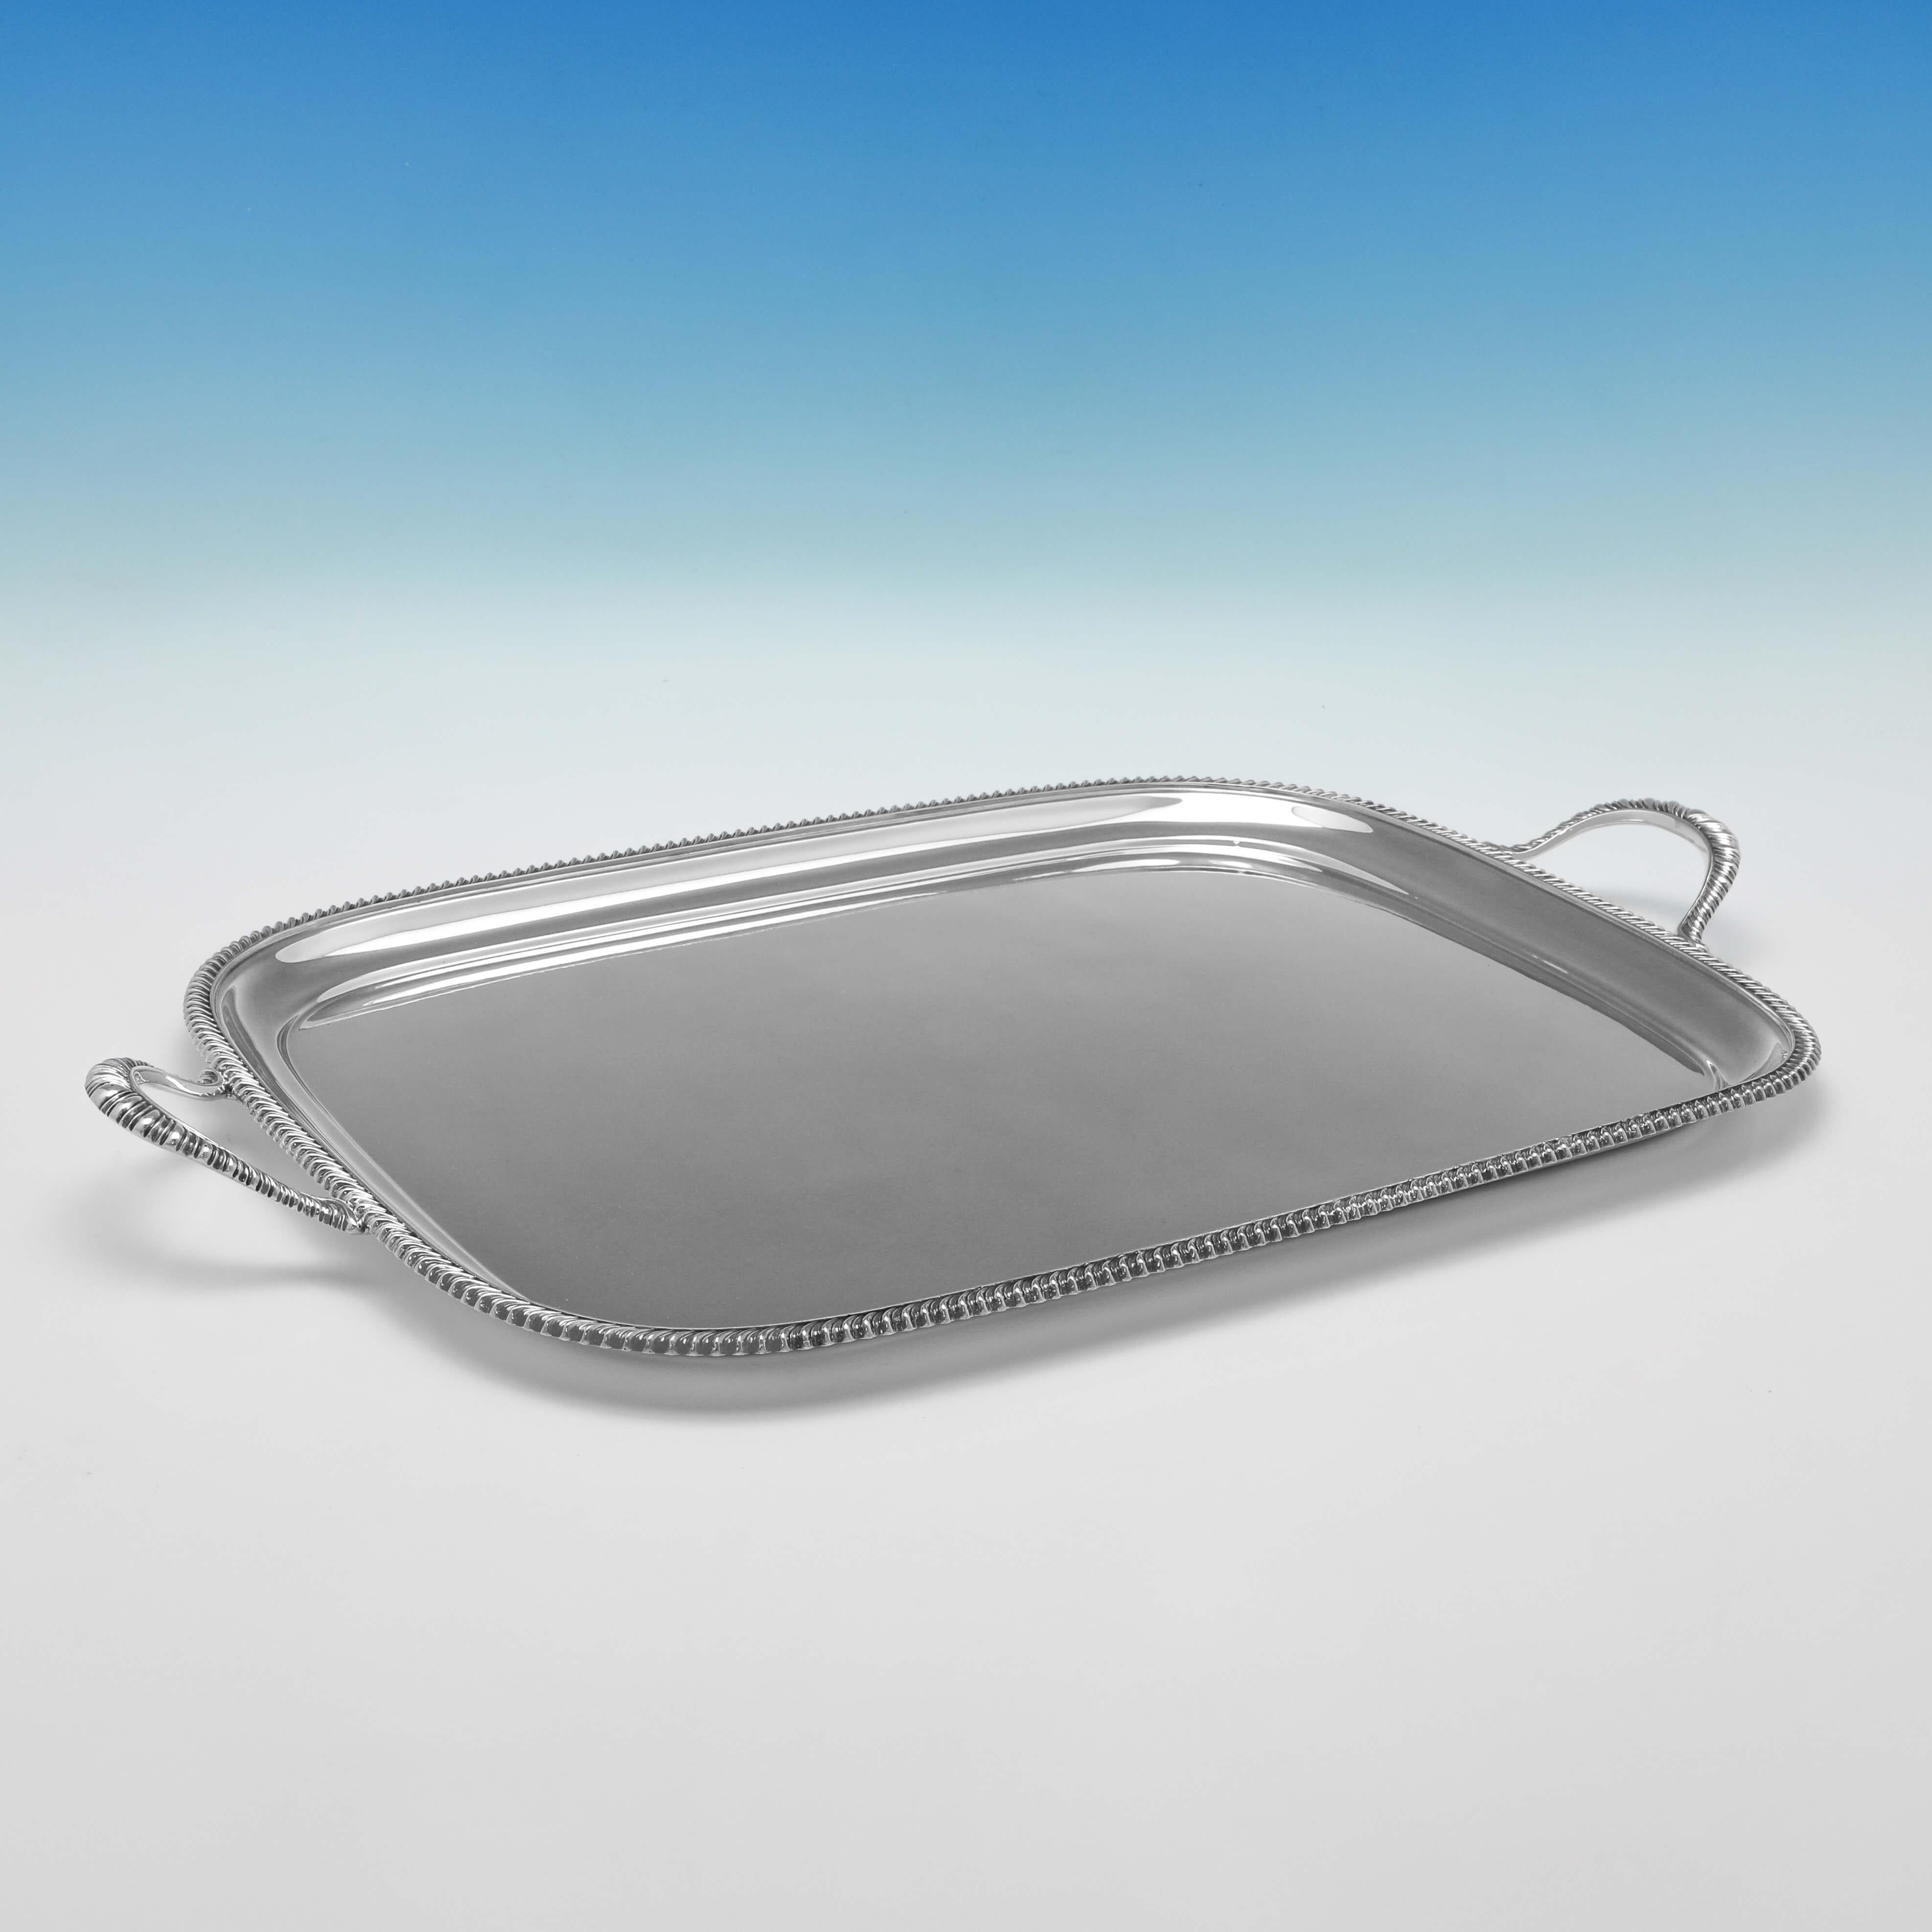 Hallmarked in Sheffield in 1952 by Atkin Brothers, this handsome, Sterling Silver Tray, features a gadroon border to the rim and handles. 

The tray measures 1.35